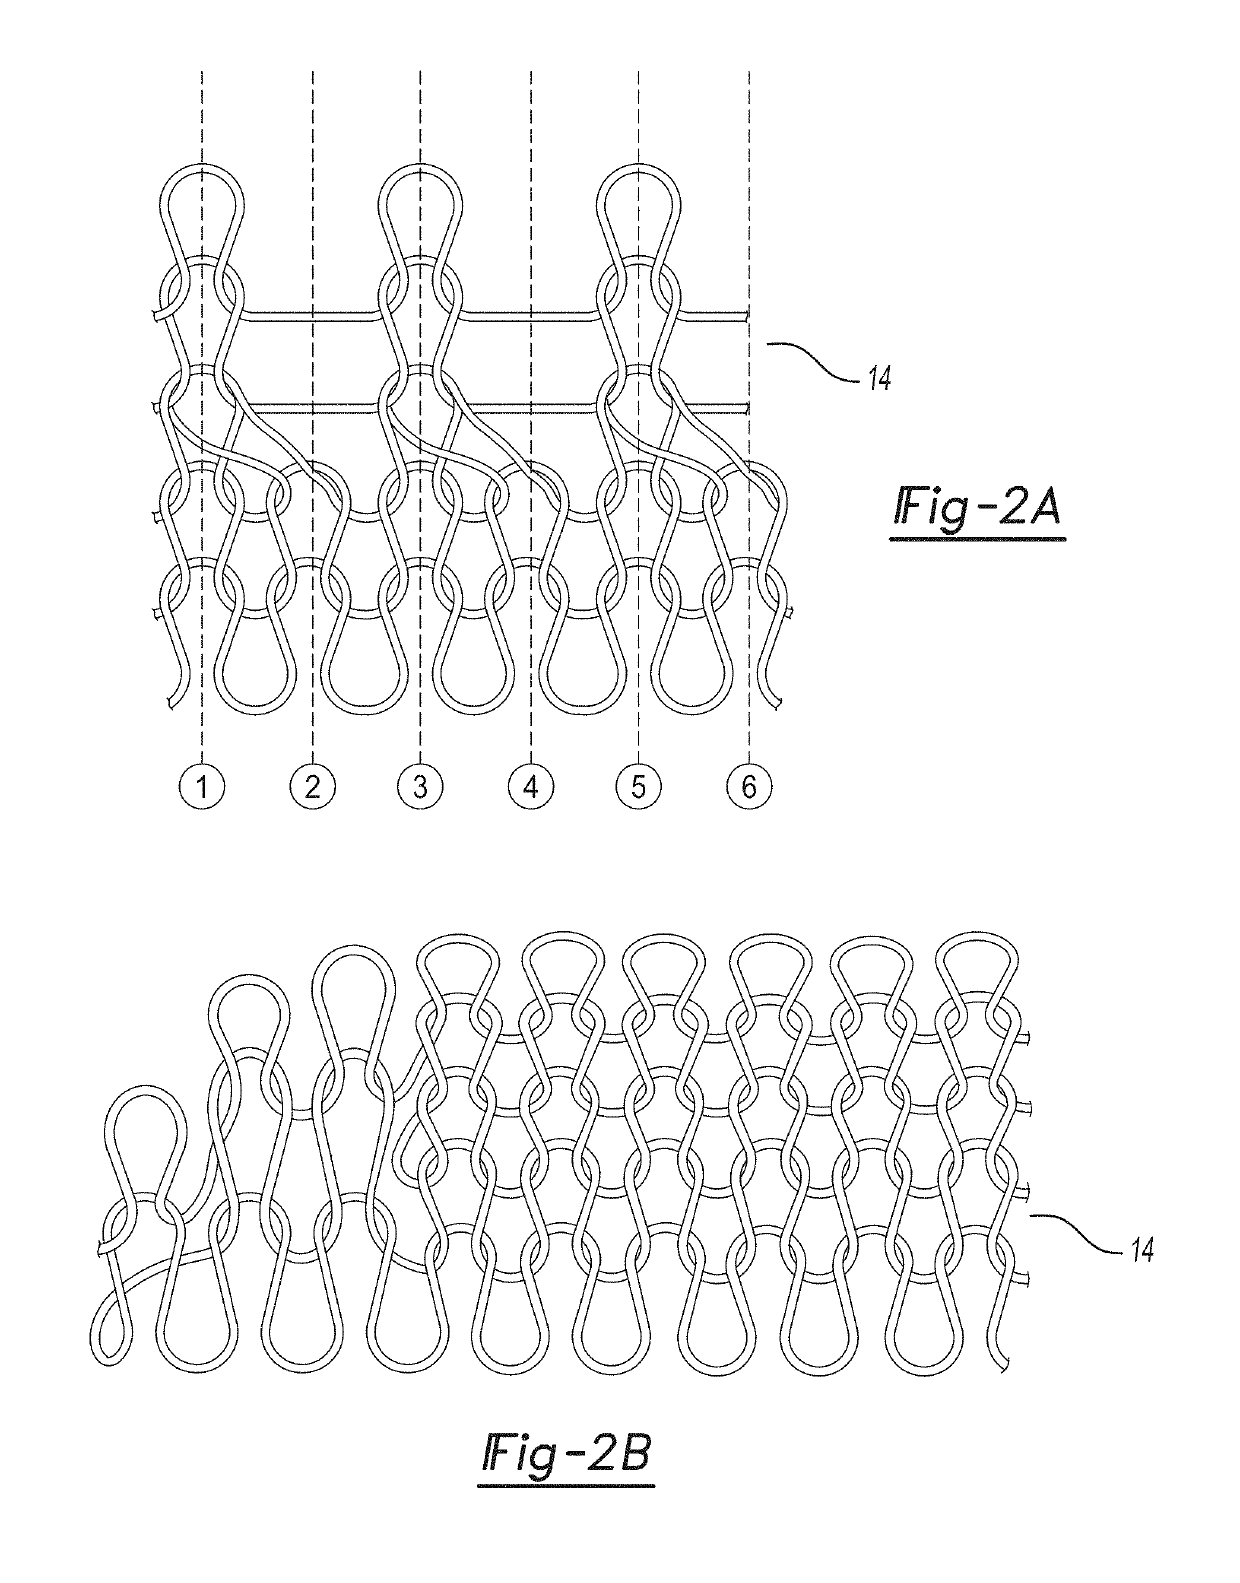 Method For Mass-Customization And Multi-Axial Motion With A Knit-Constrained Actuator